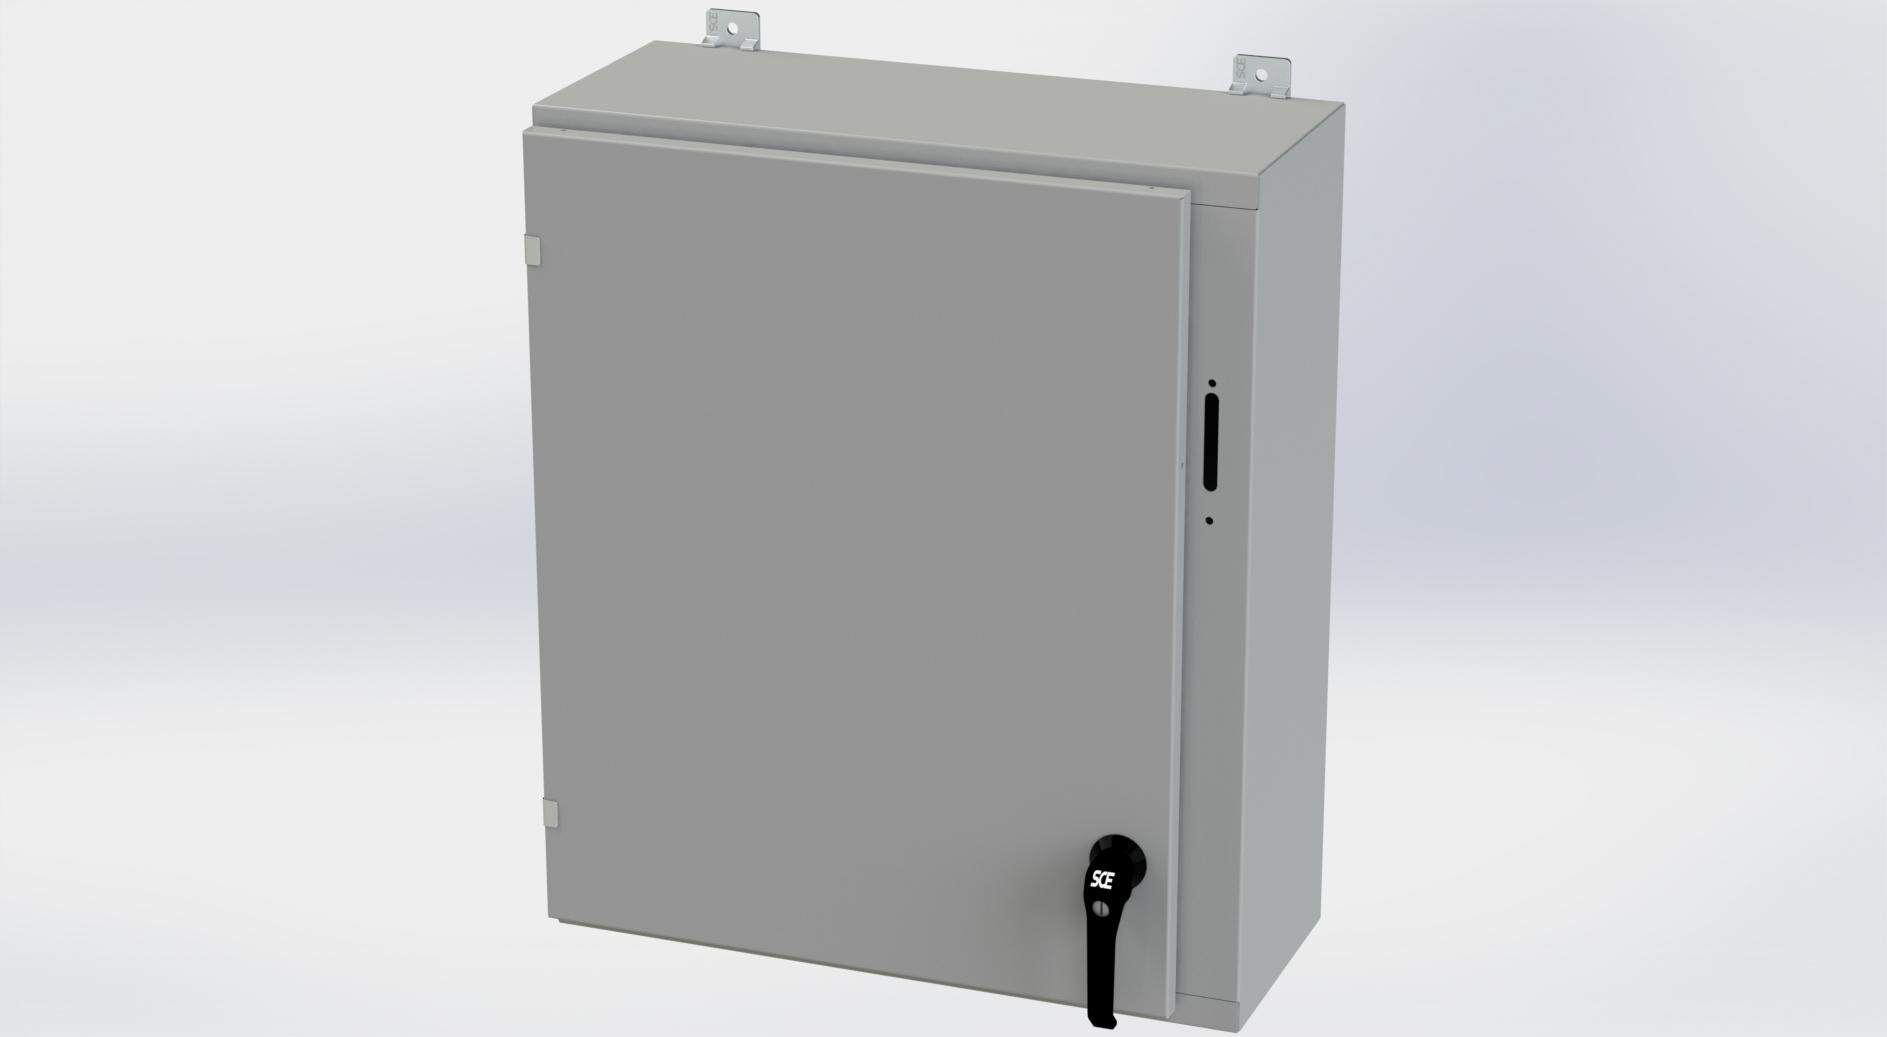 Saginaw Control SCE-30SA2610LPPL Obselete Use SCE-30XEL2510LP, Height:30.00", Width:25.38", Depth:10.00", ANSI-61 gray powder coating inside and out. Optional sub-panels are powder coated white.